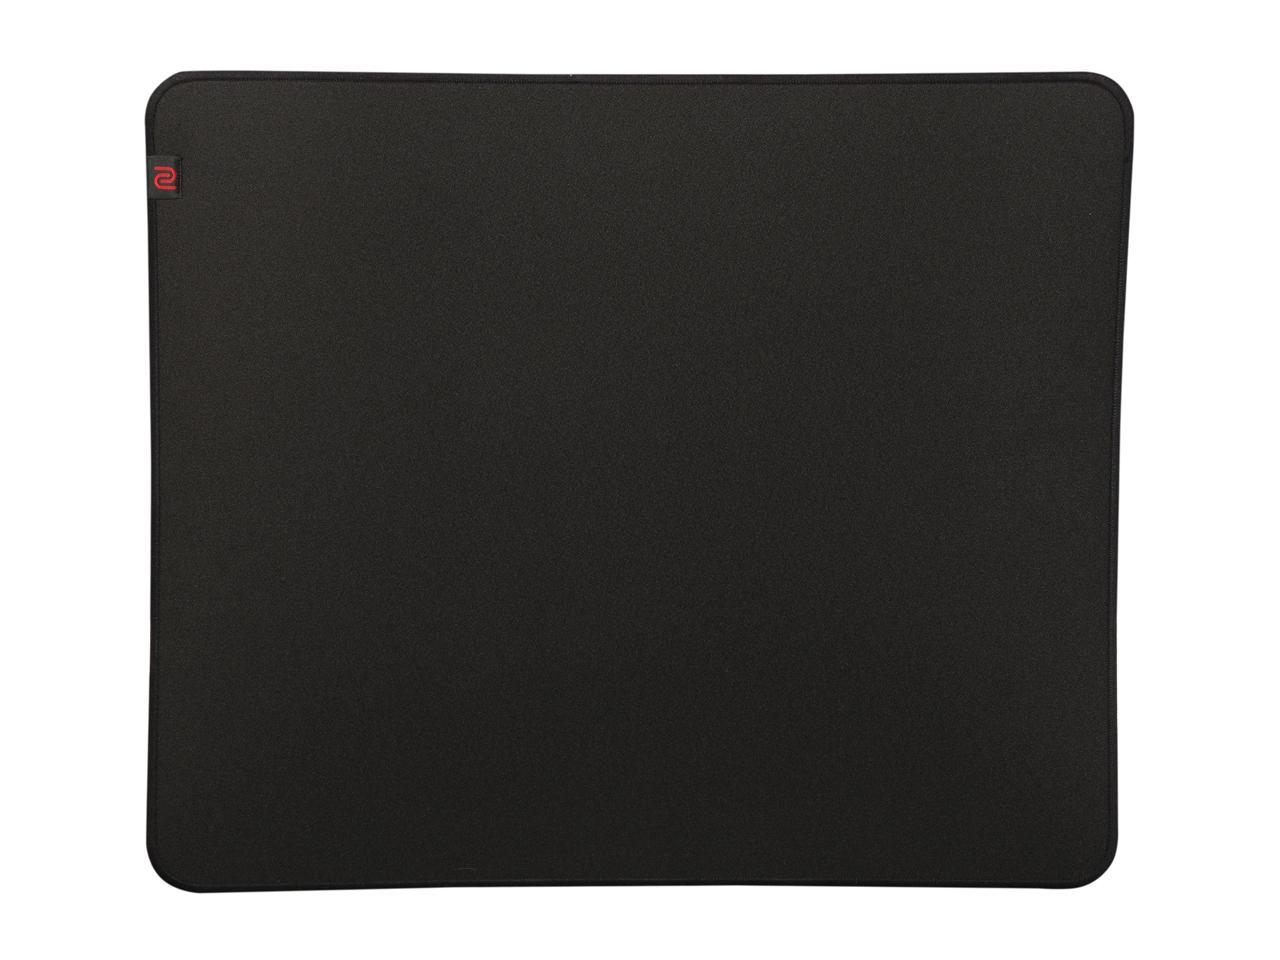 BenQ ZOWIE GTF-X Gaming Mousepad For Esports | Low Friction Surface ...